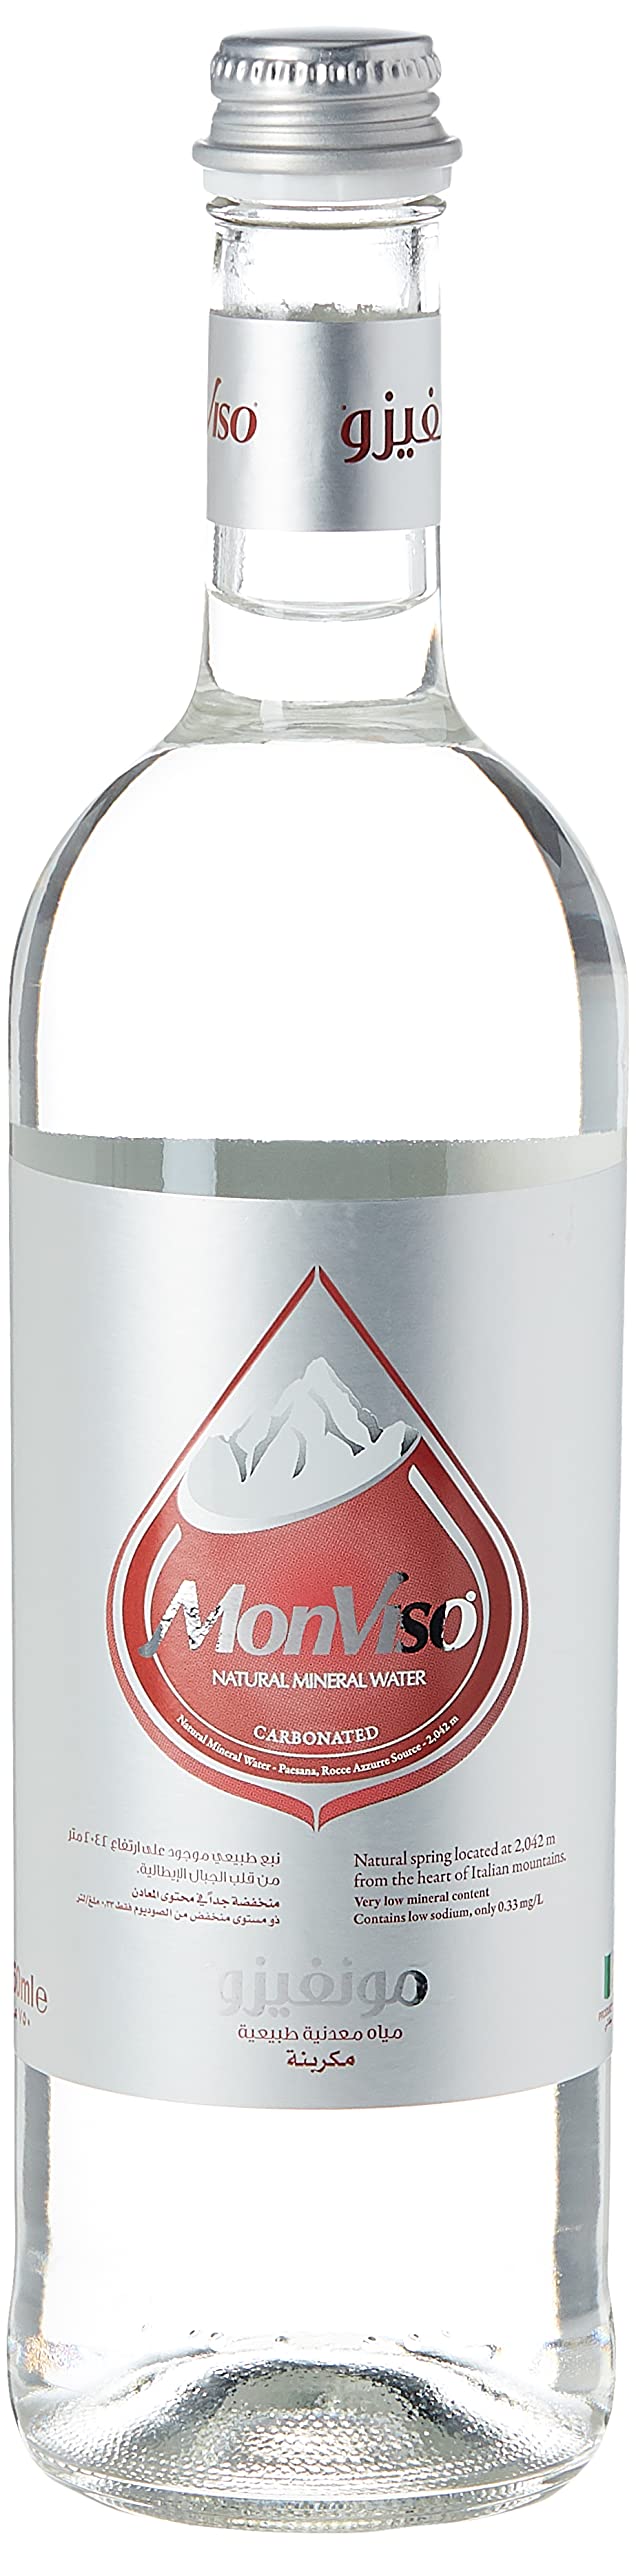 Monviso Natural Mineral Water 375ml - Non-carbonated